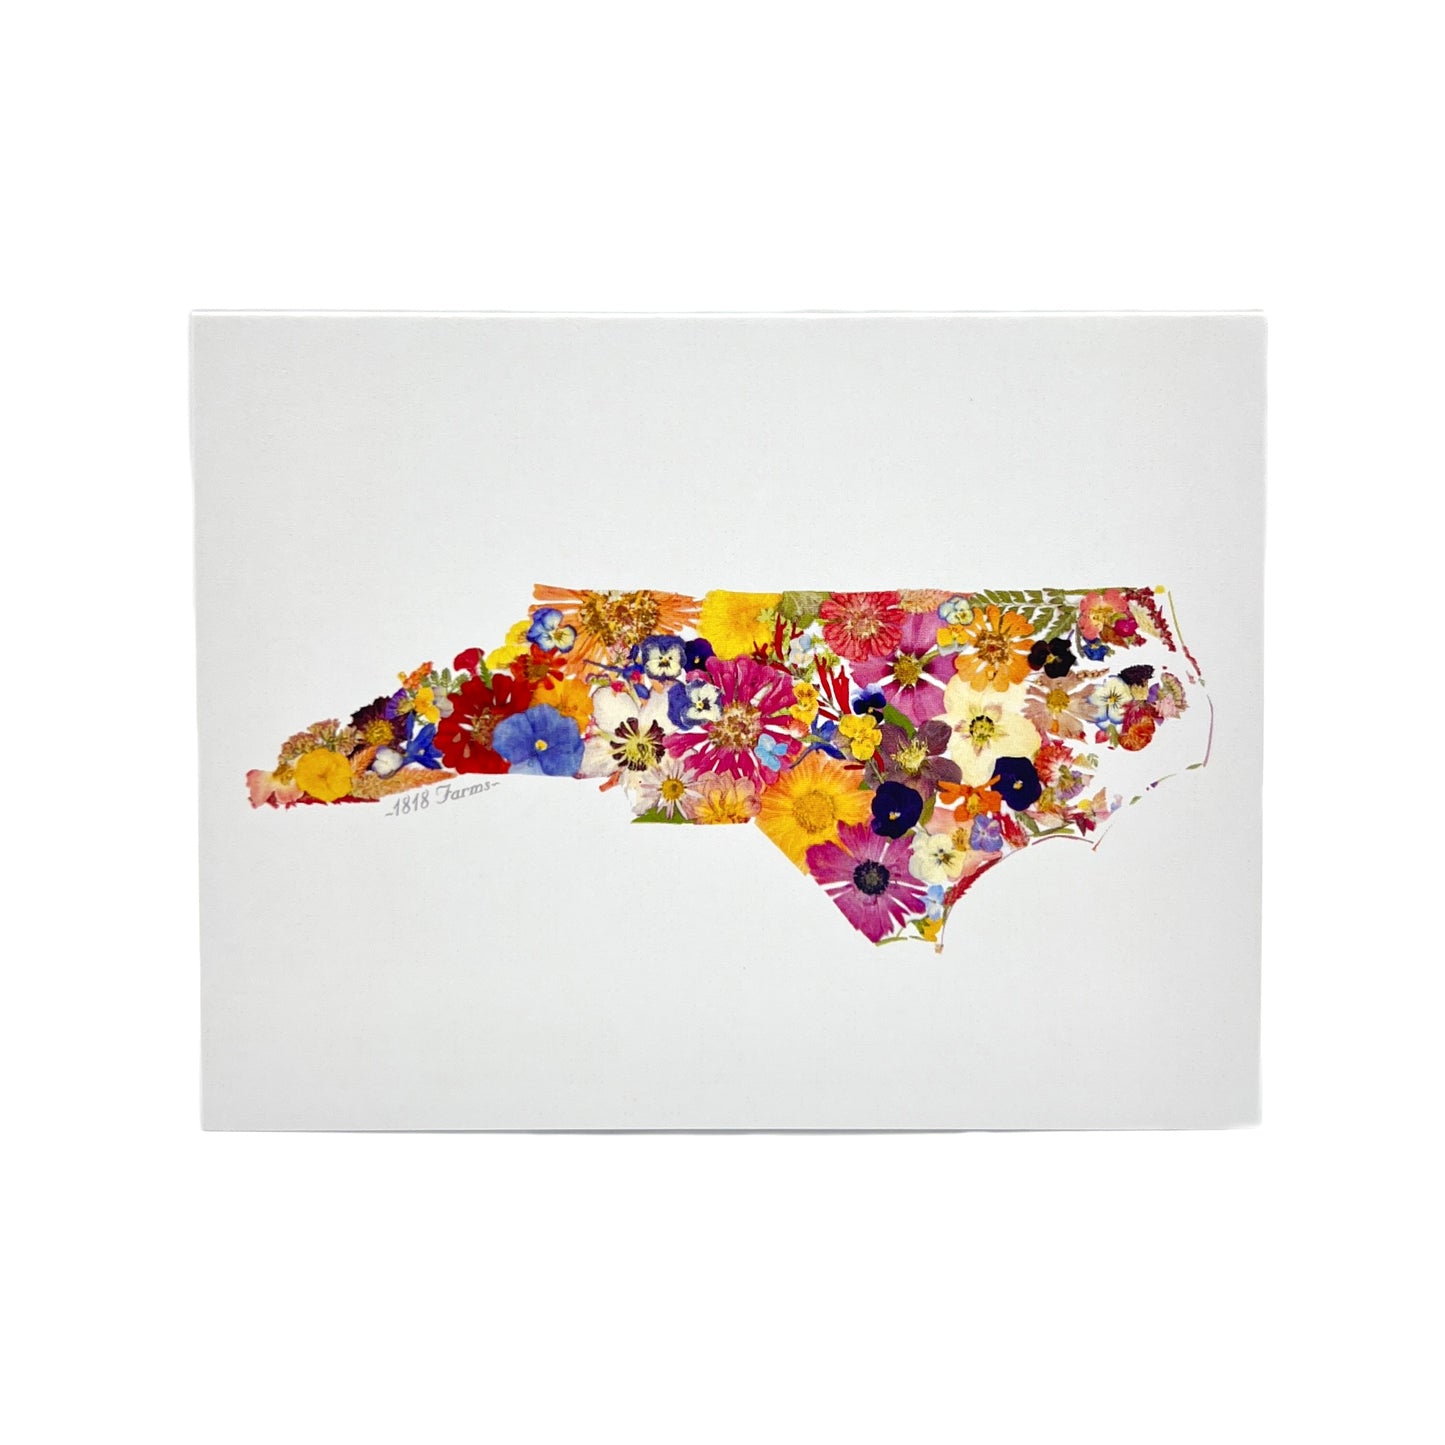 State Themed Notecards (Set of 6)  - "Where I Bloom" Collection Notecard 1818 Farms North Carolina  